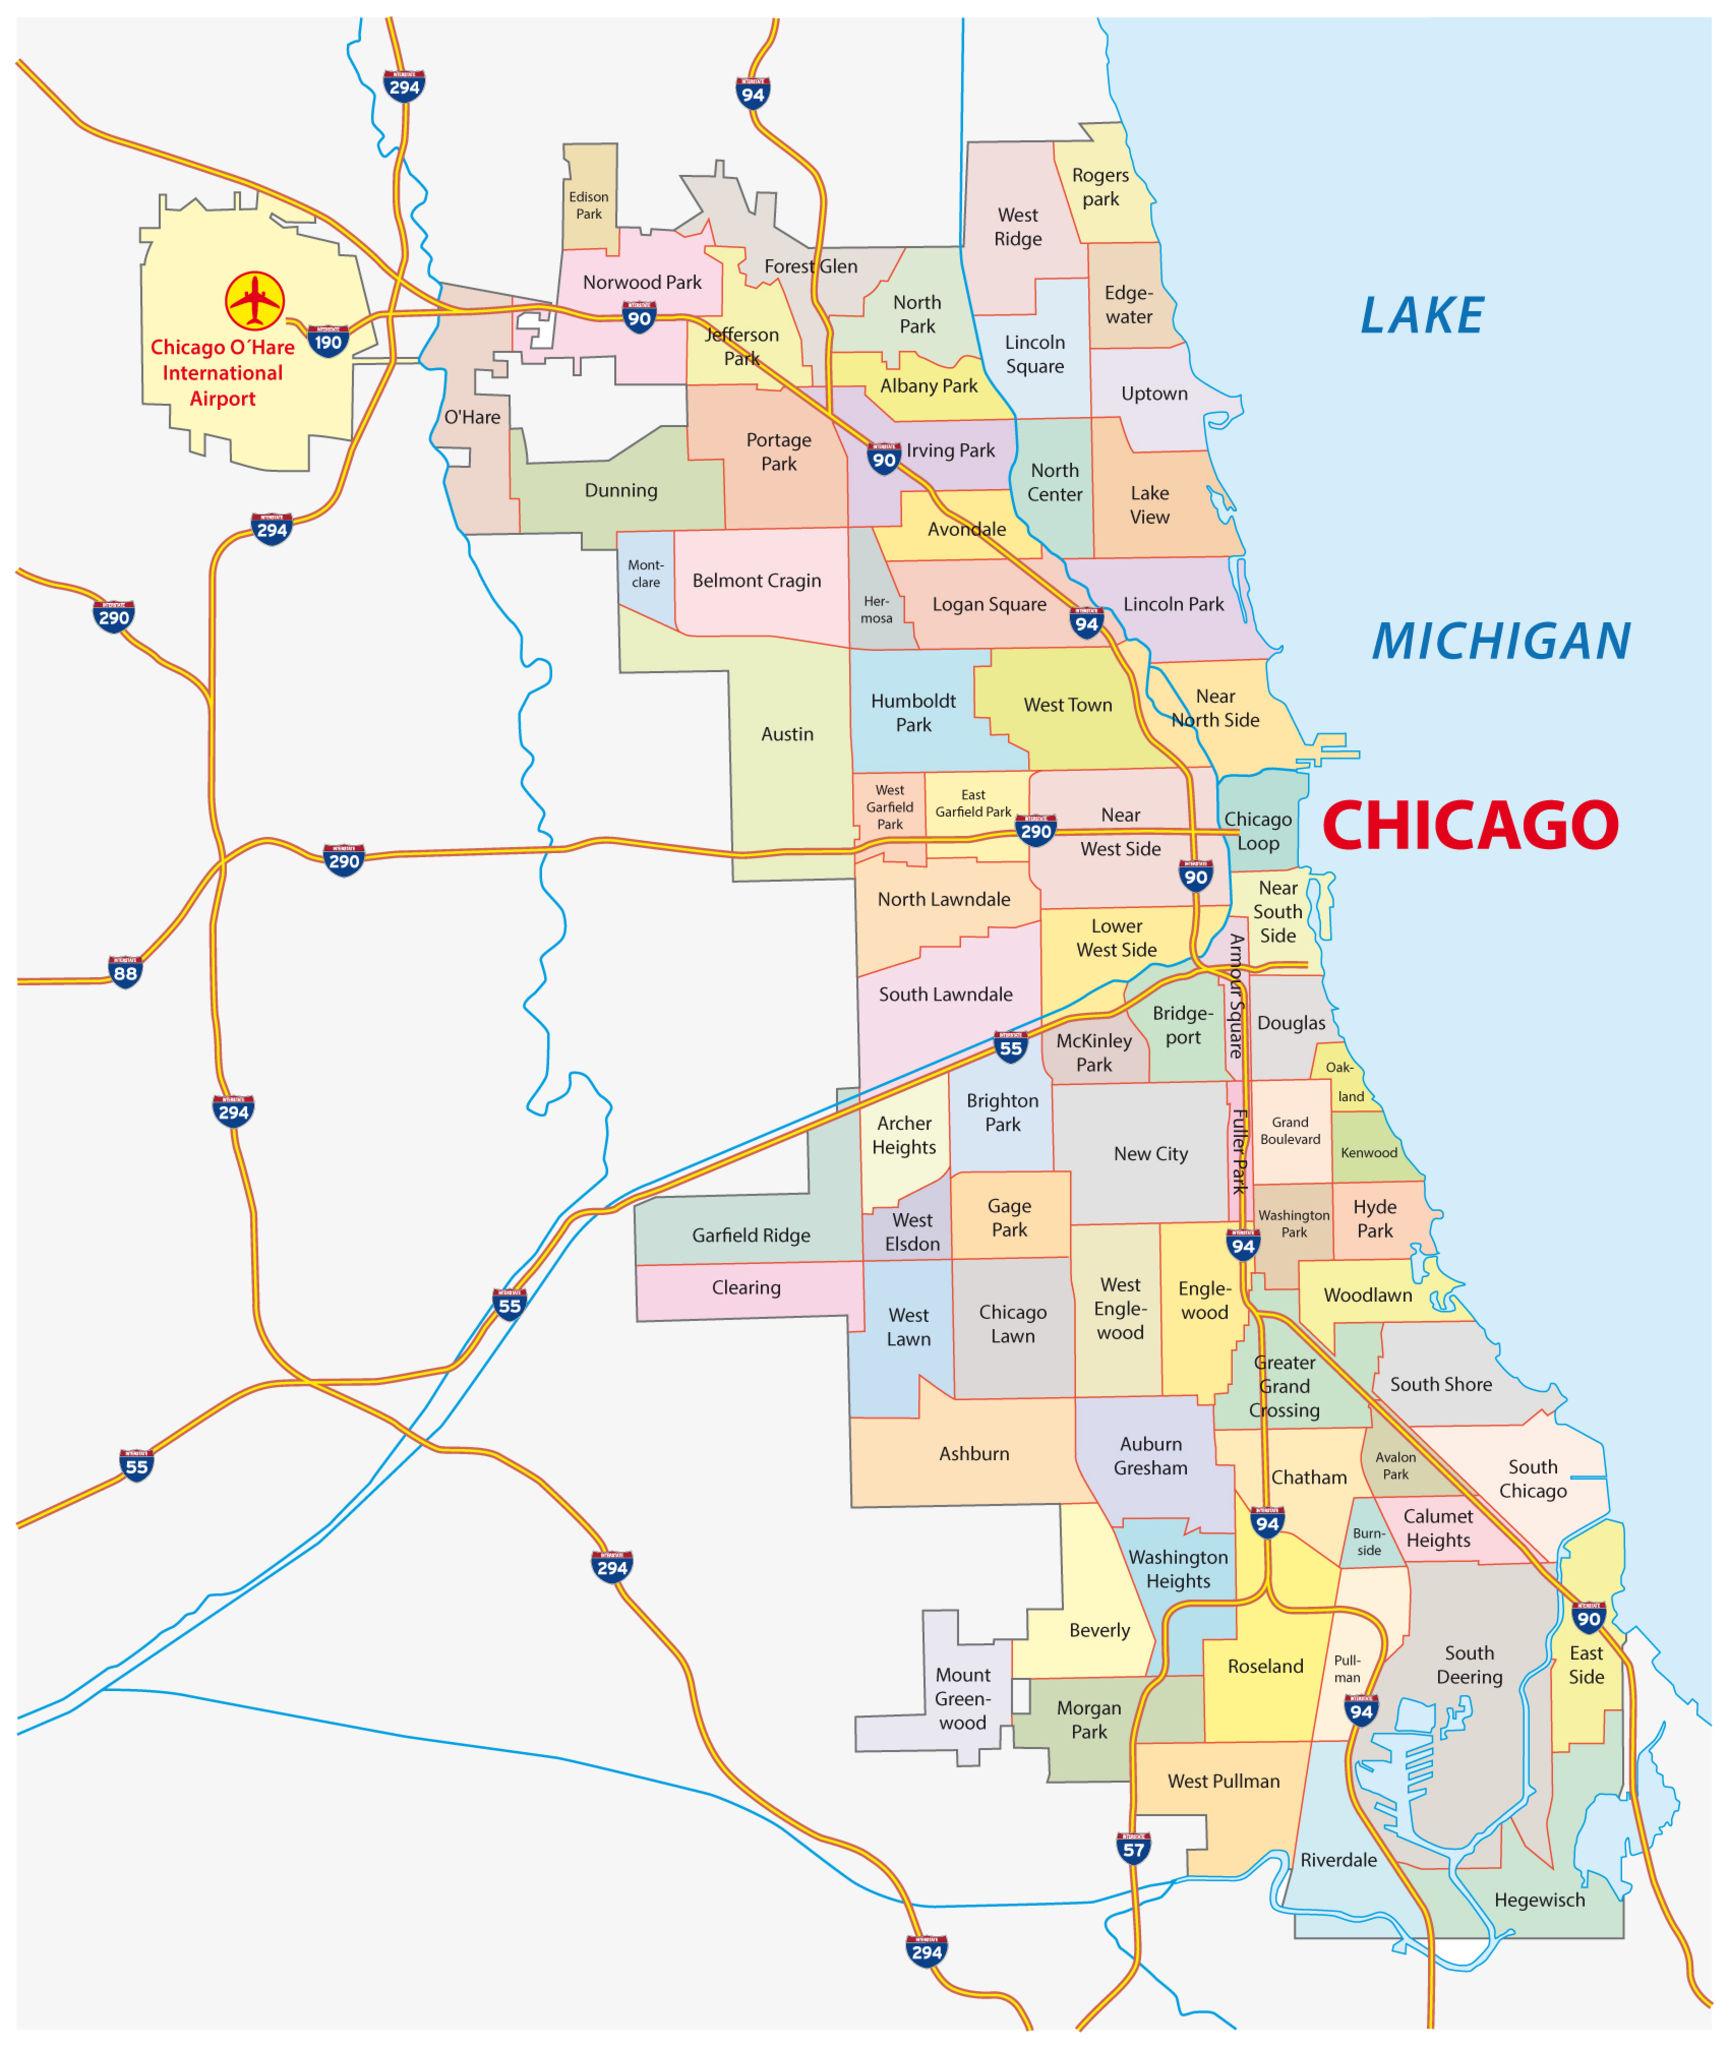 Chicago neighborhoods that are deemed dangerous. (Photo: Chicago maps)